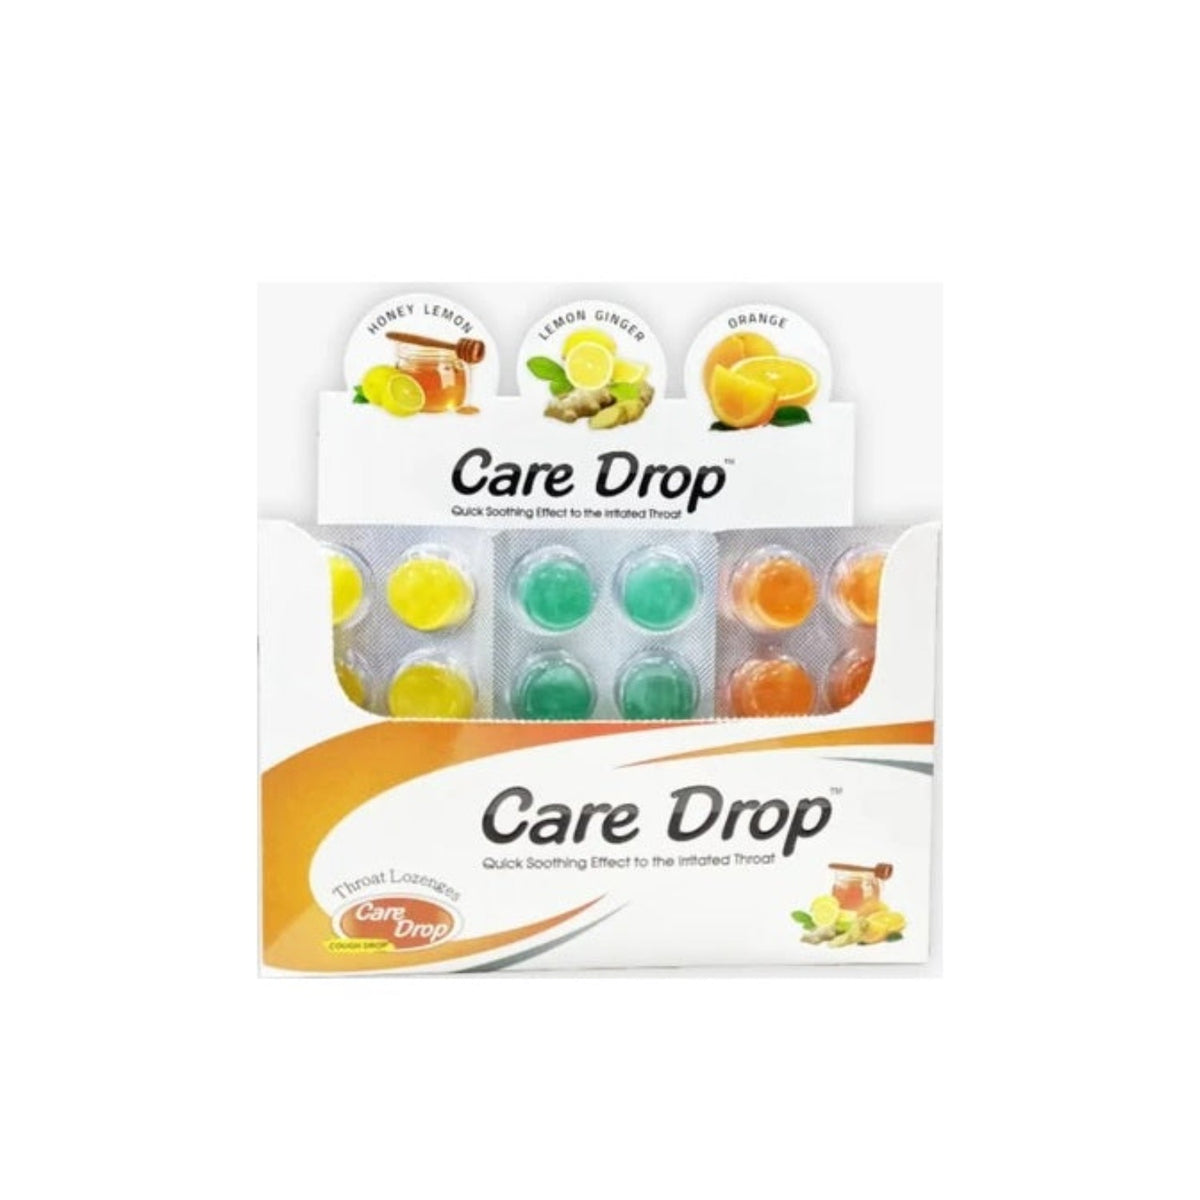 Prince Care Ayurvedic Care Drop Mix For Personal Lozenges (8 X 30 Blister)